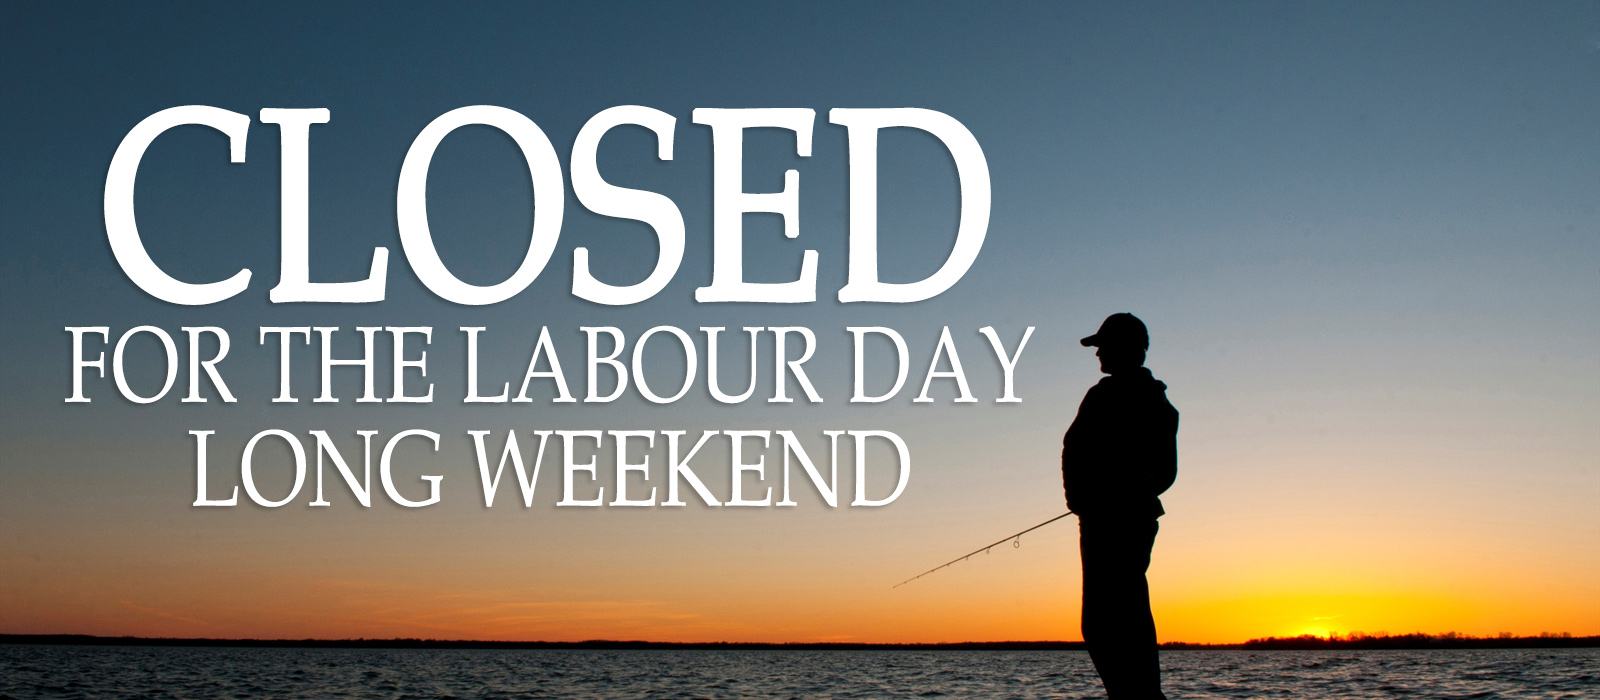 CK Spices, Coffee & Teas is Closed for the Labour Day Long Weekend!